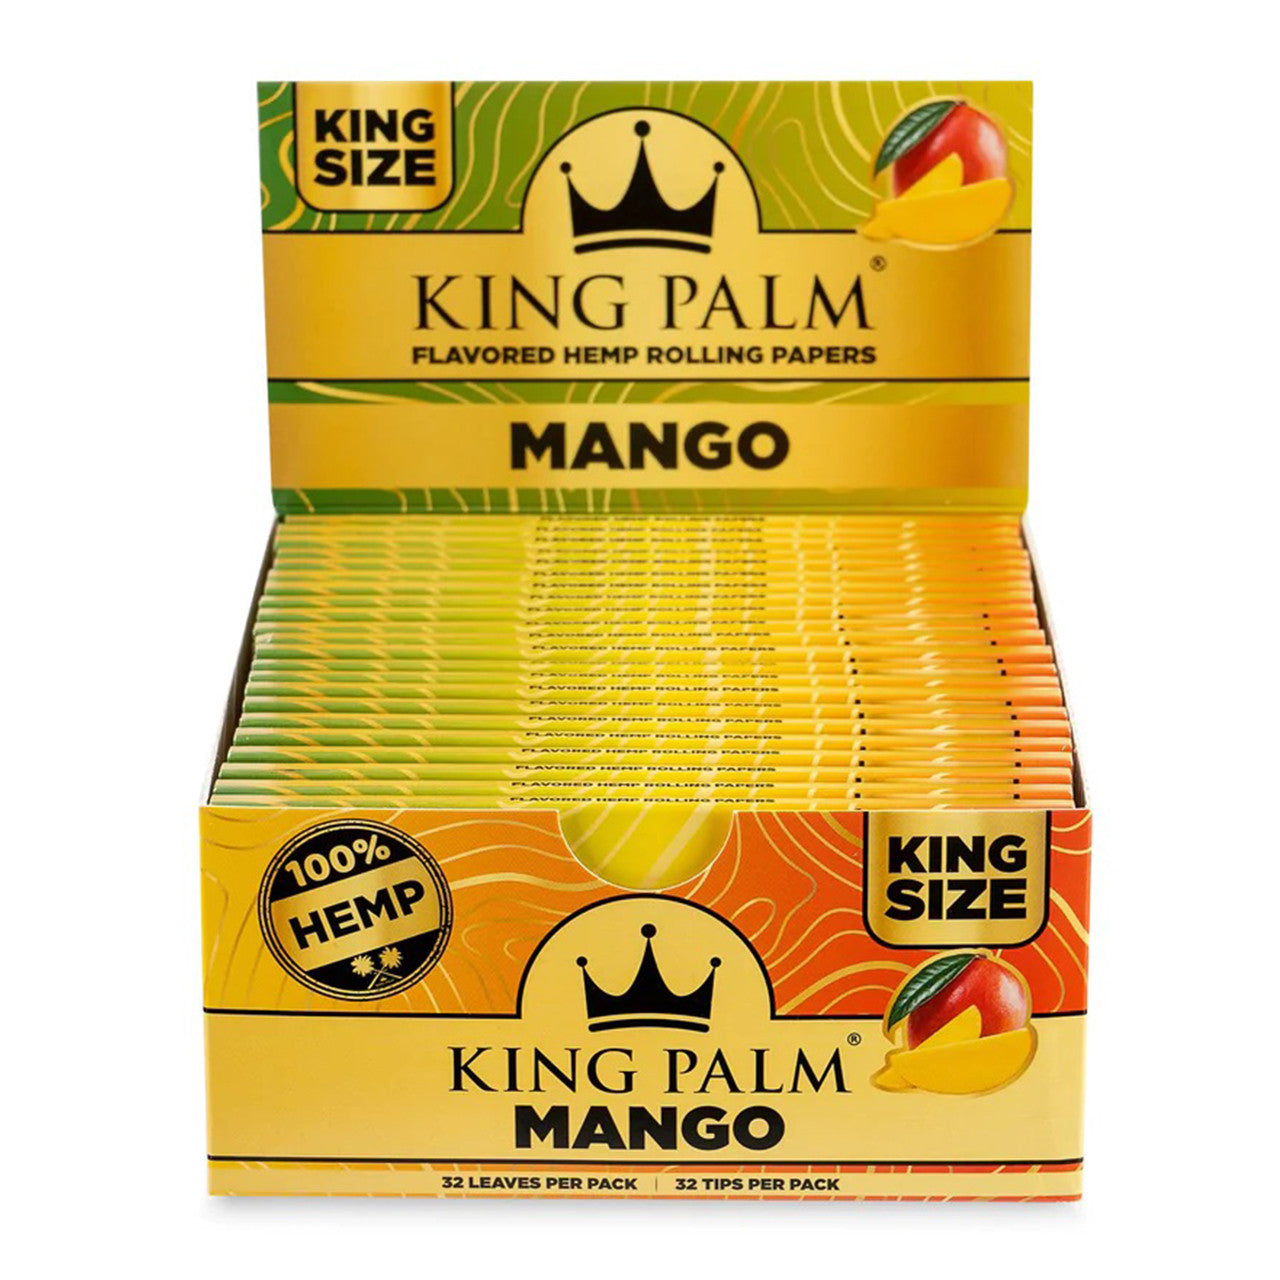 King Palm Flavored Hemp Rolling Papers King Size Mango Box